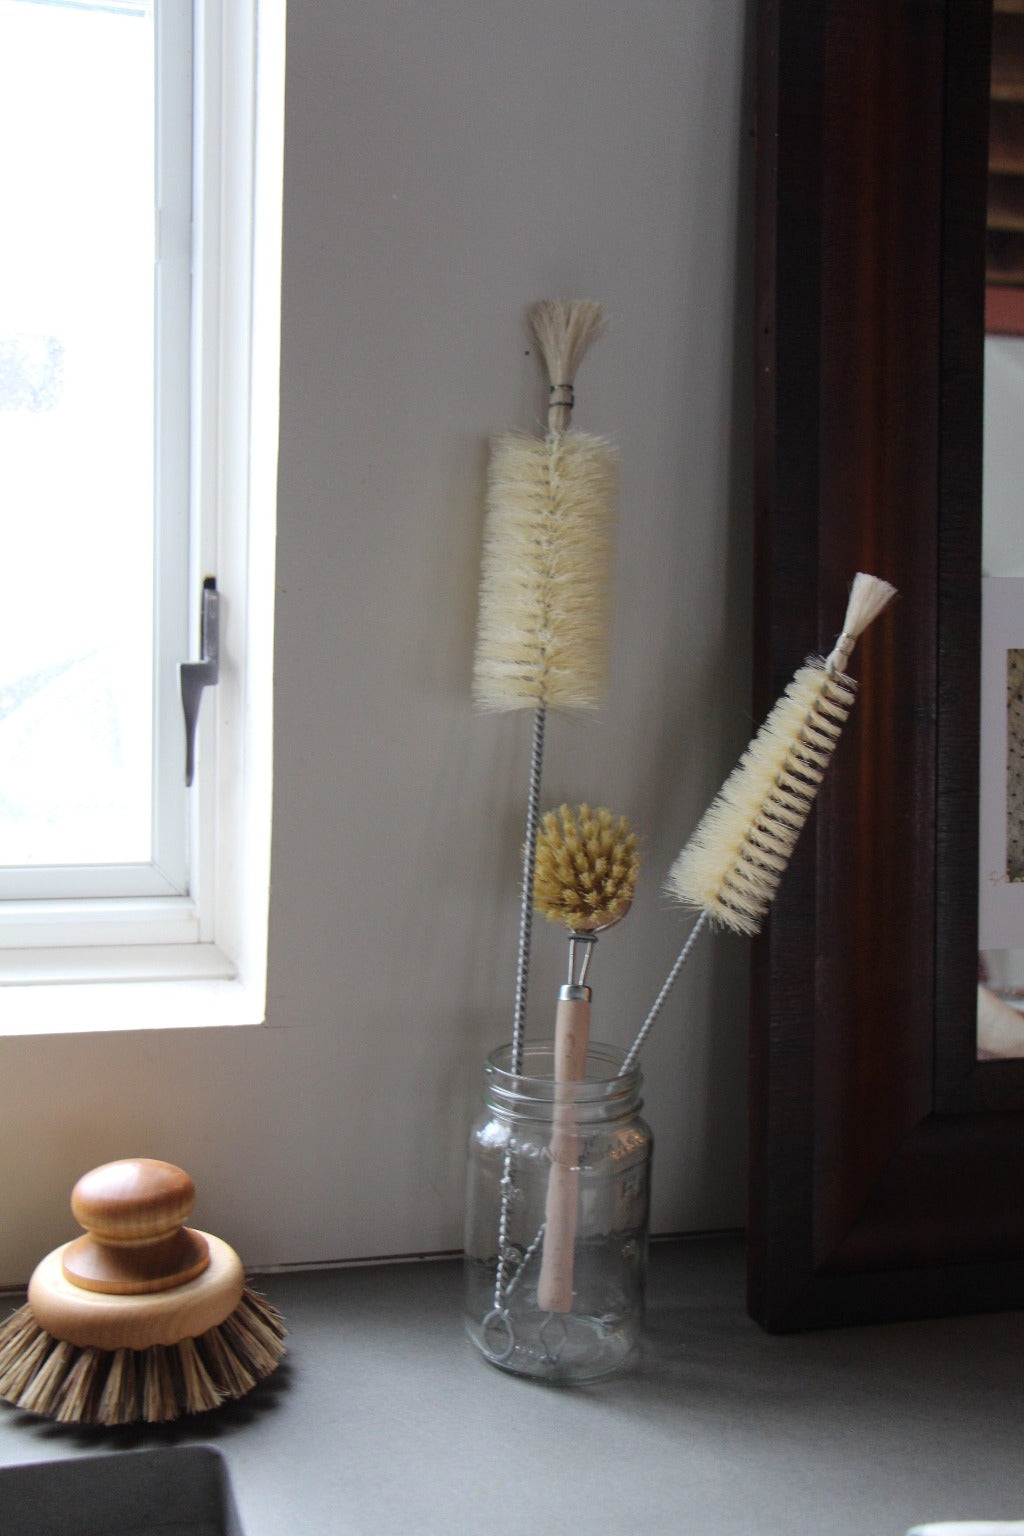 Narrow and long bottle cleaning brushes shown in jar on countertop with handled dish brush